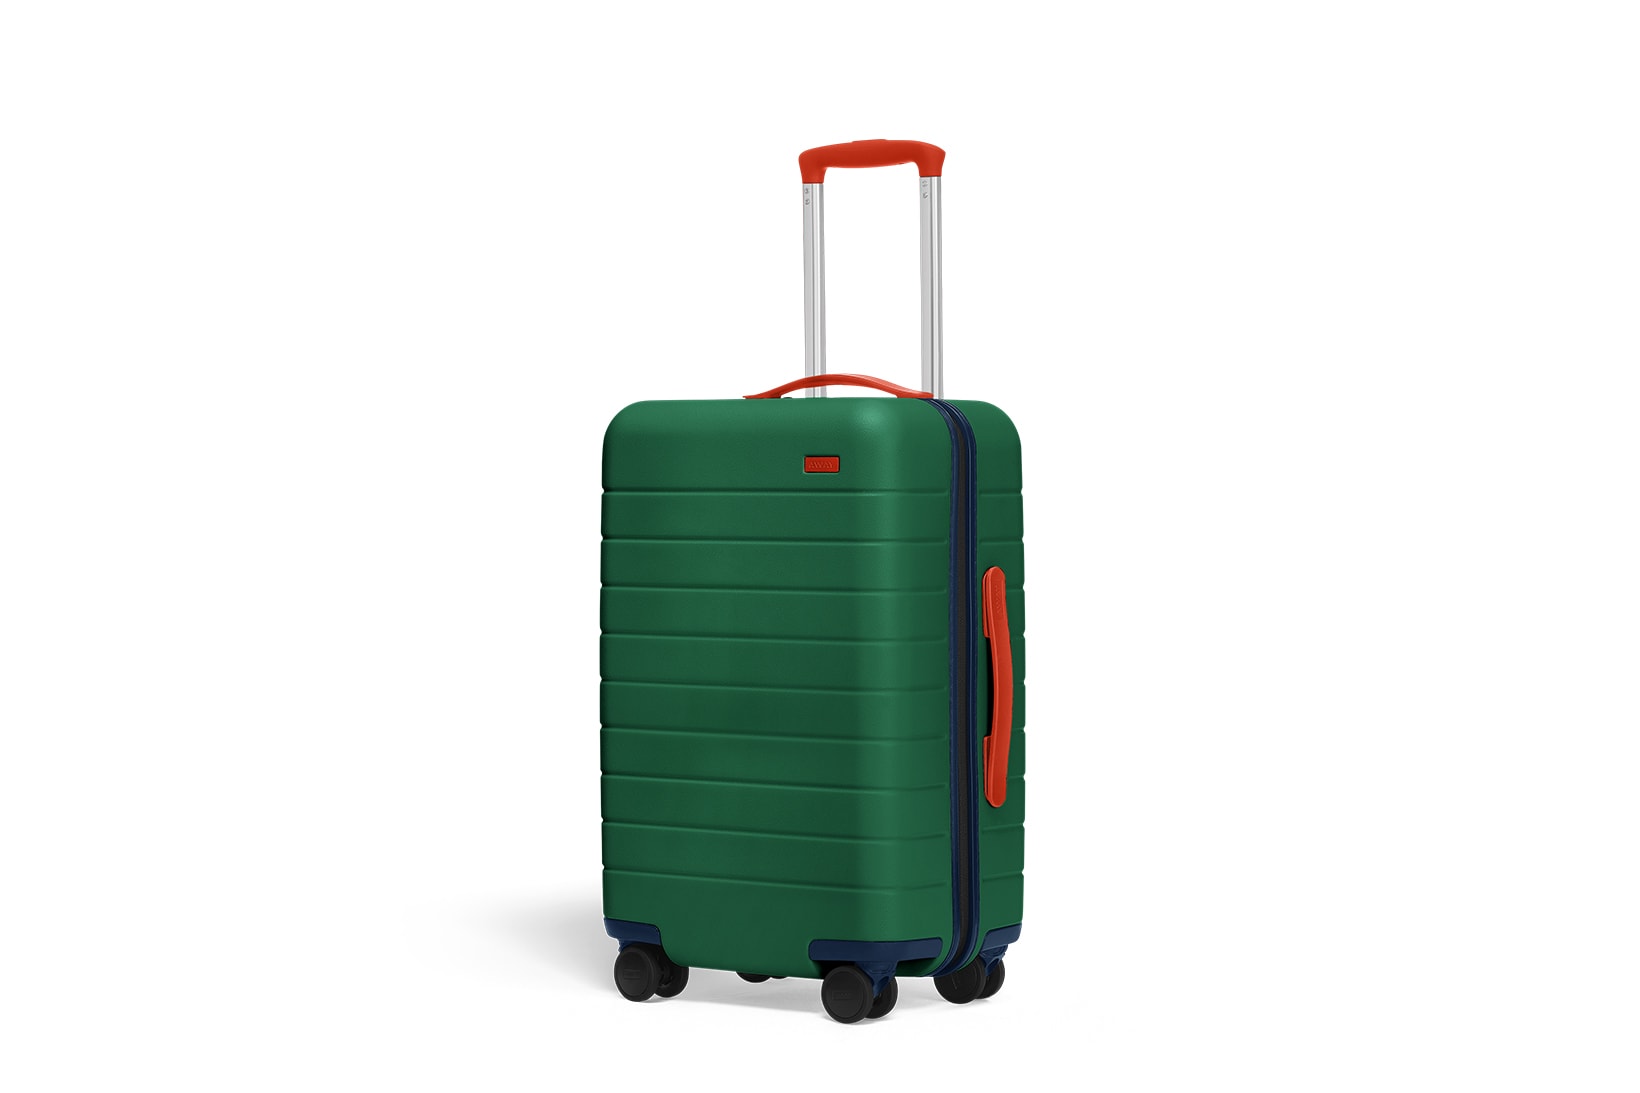 away technicolor collection suitcases the carry on tropic